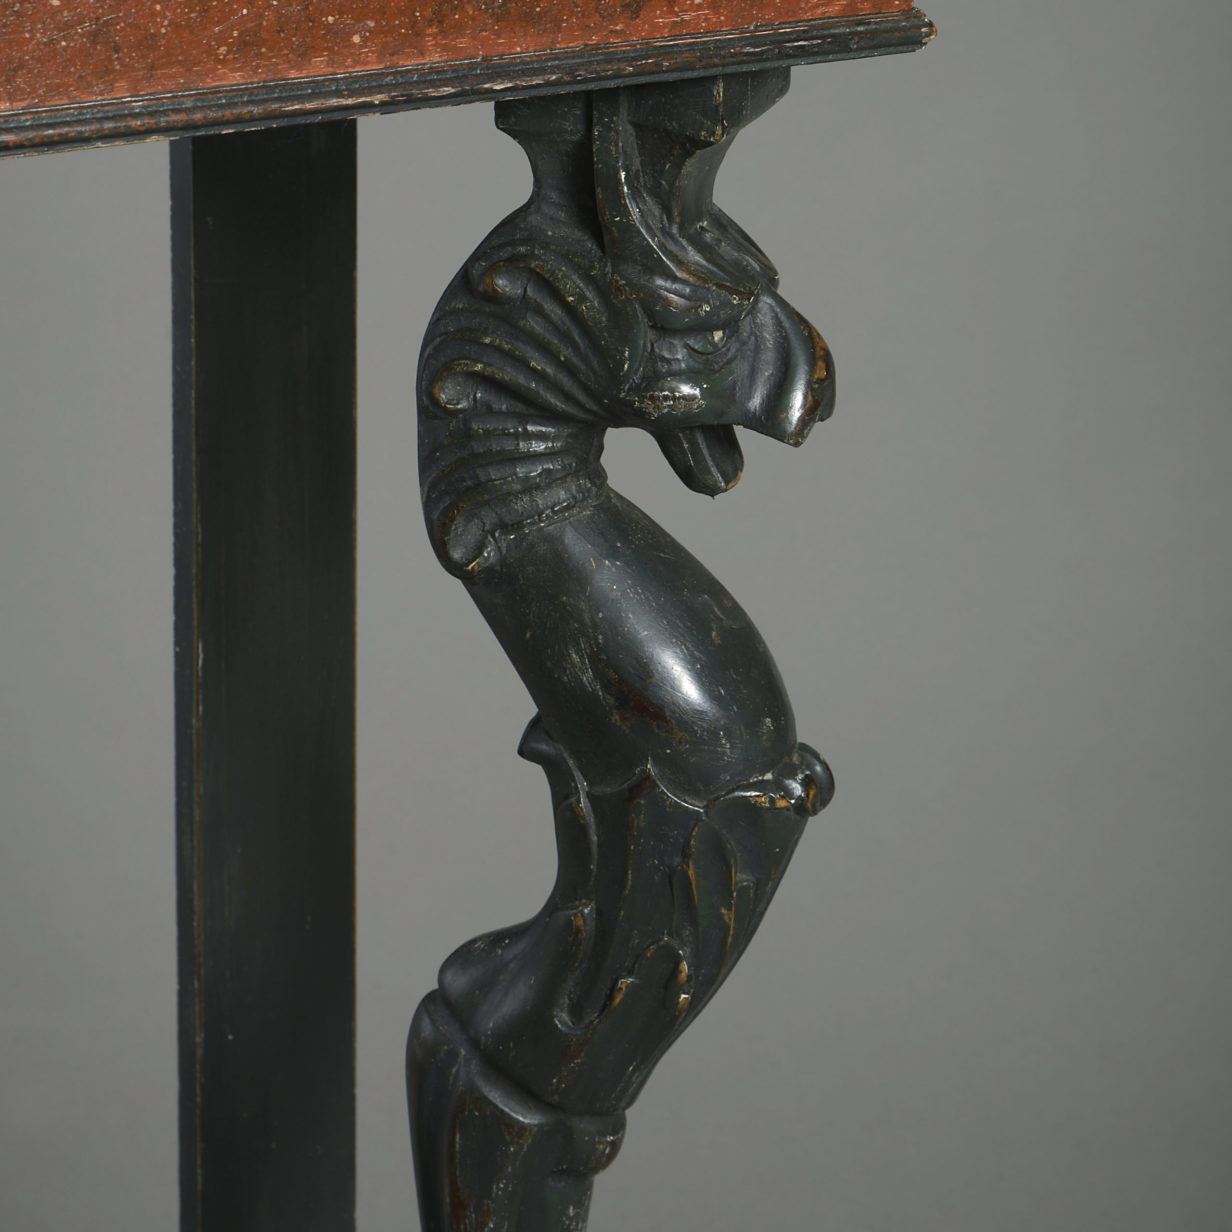 A 19th century painted neo-classical console table